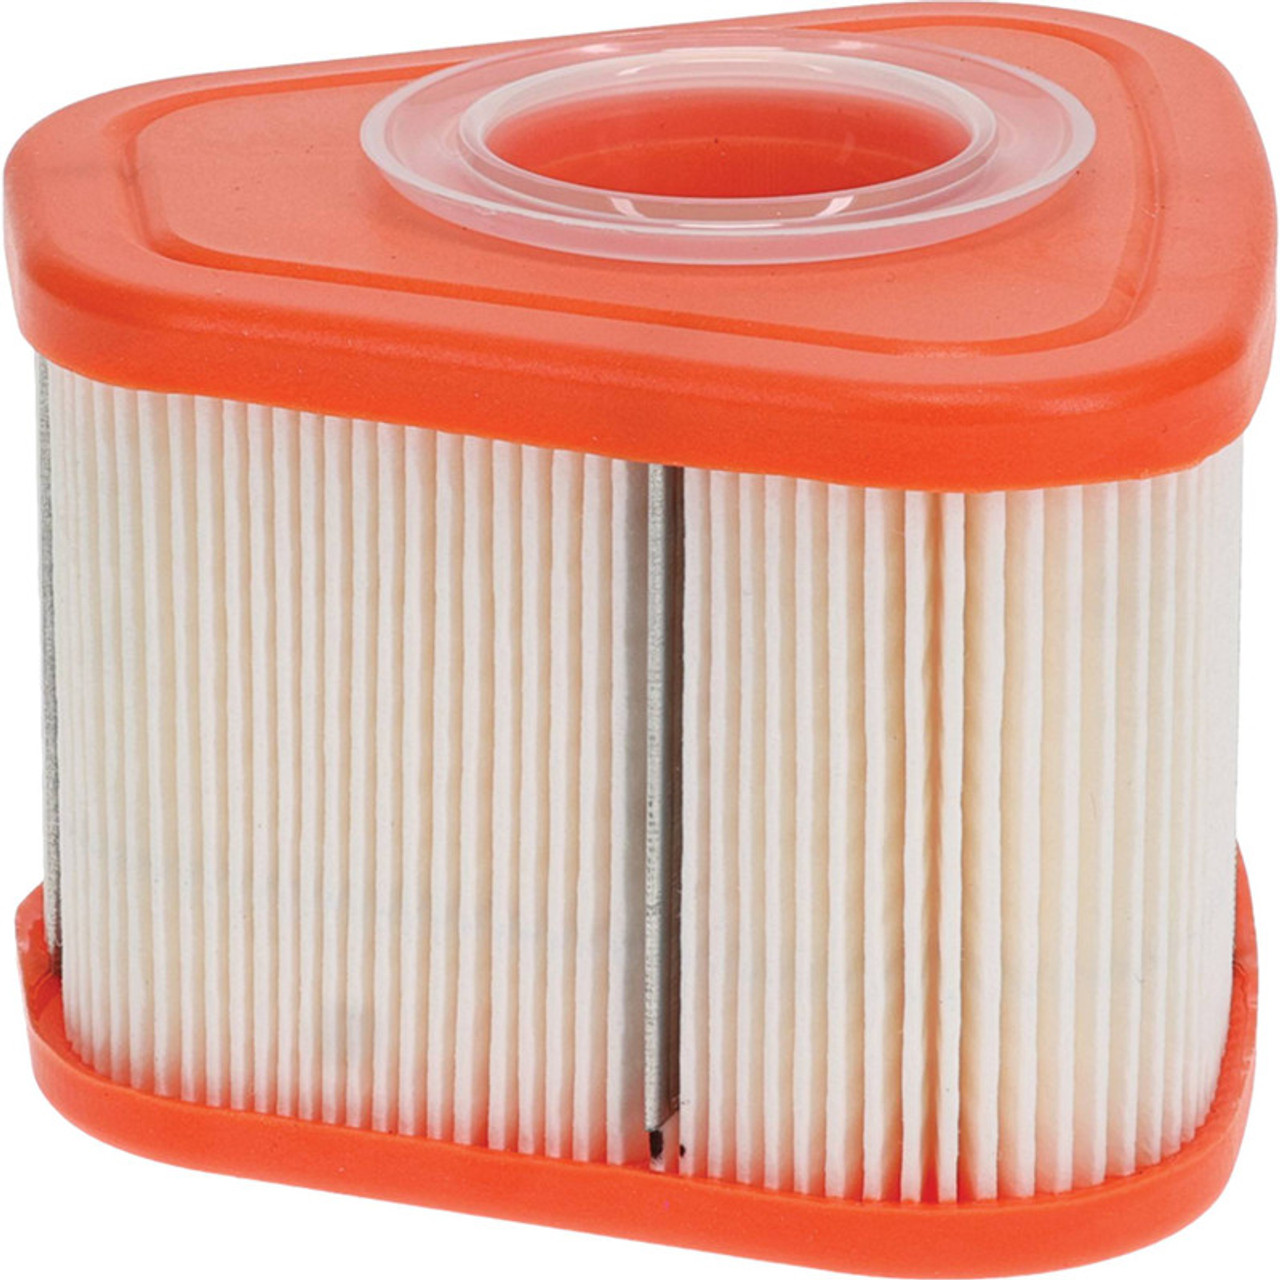 Air Filter for Briggs and Stratton 595853 597265 115P02 115P05 123P02 123P07123P0B 123P32 125902 engines &